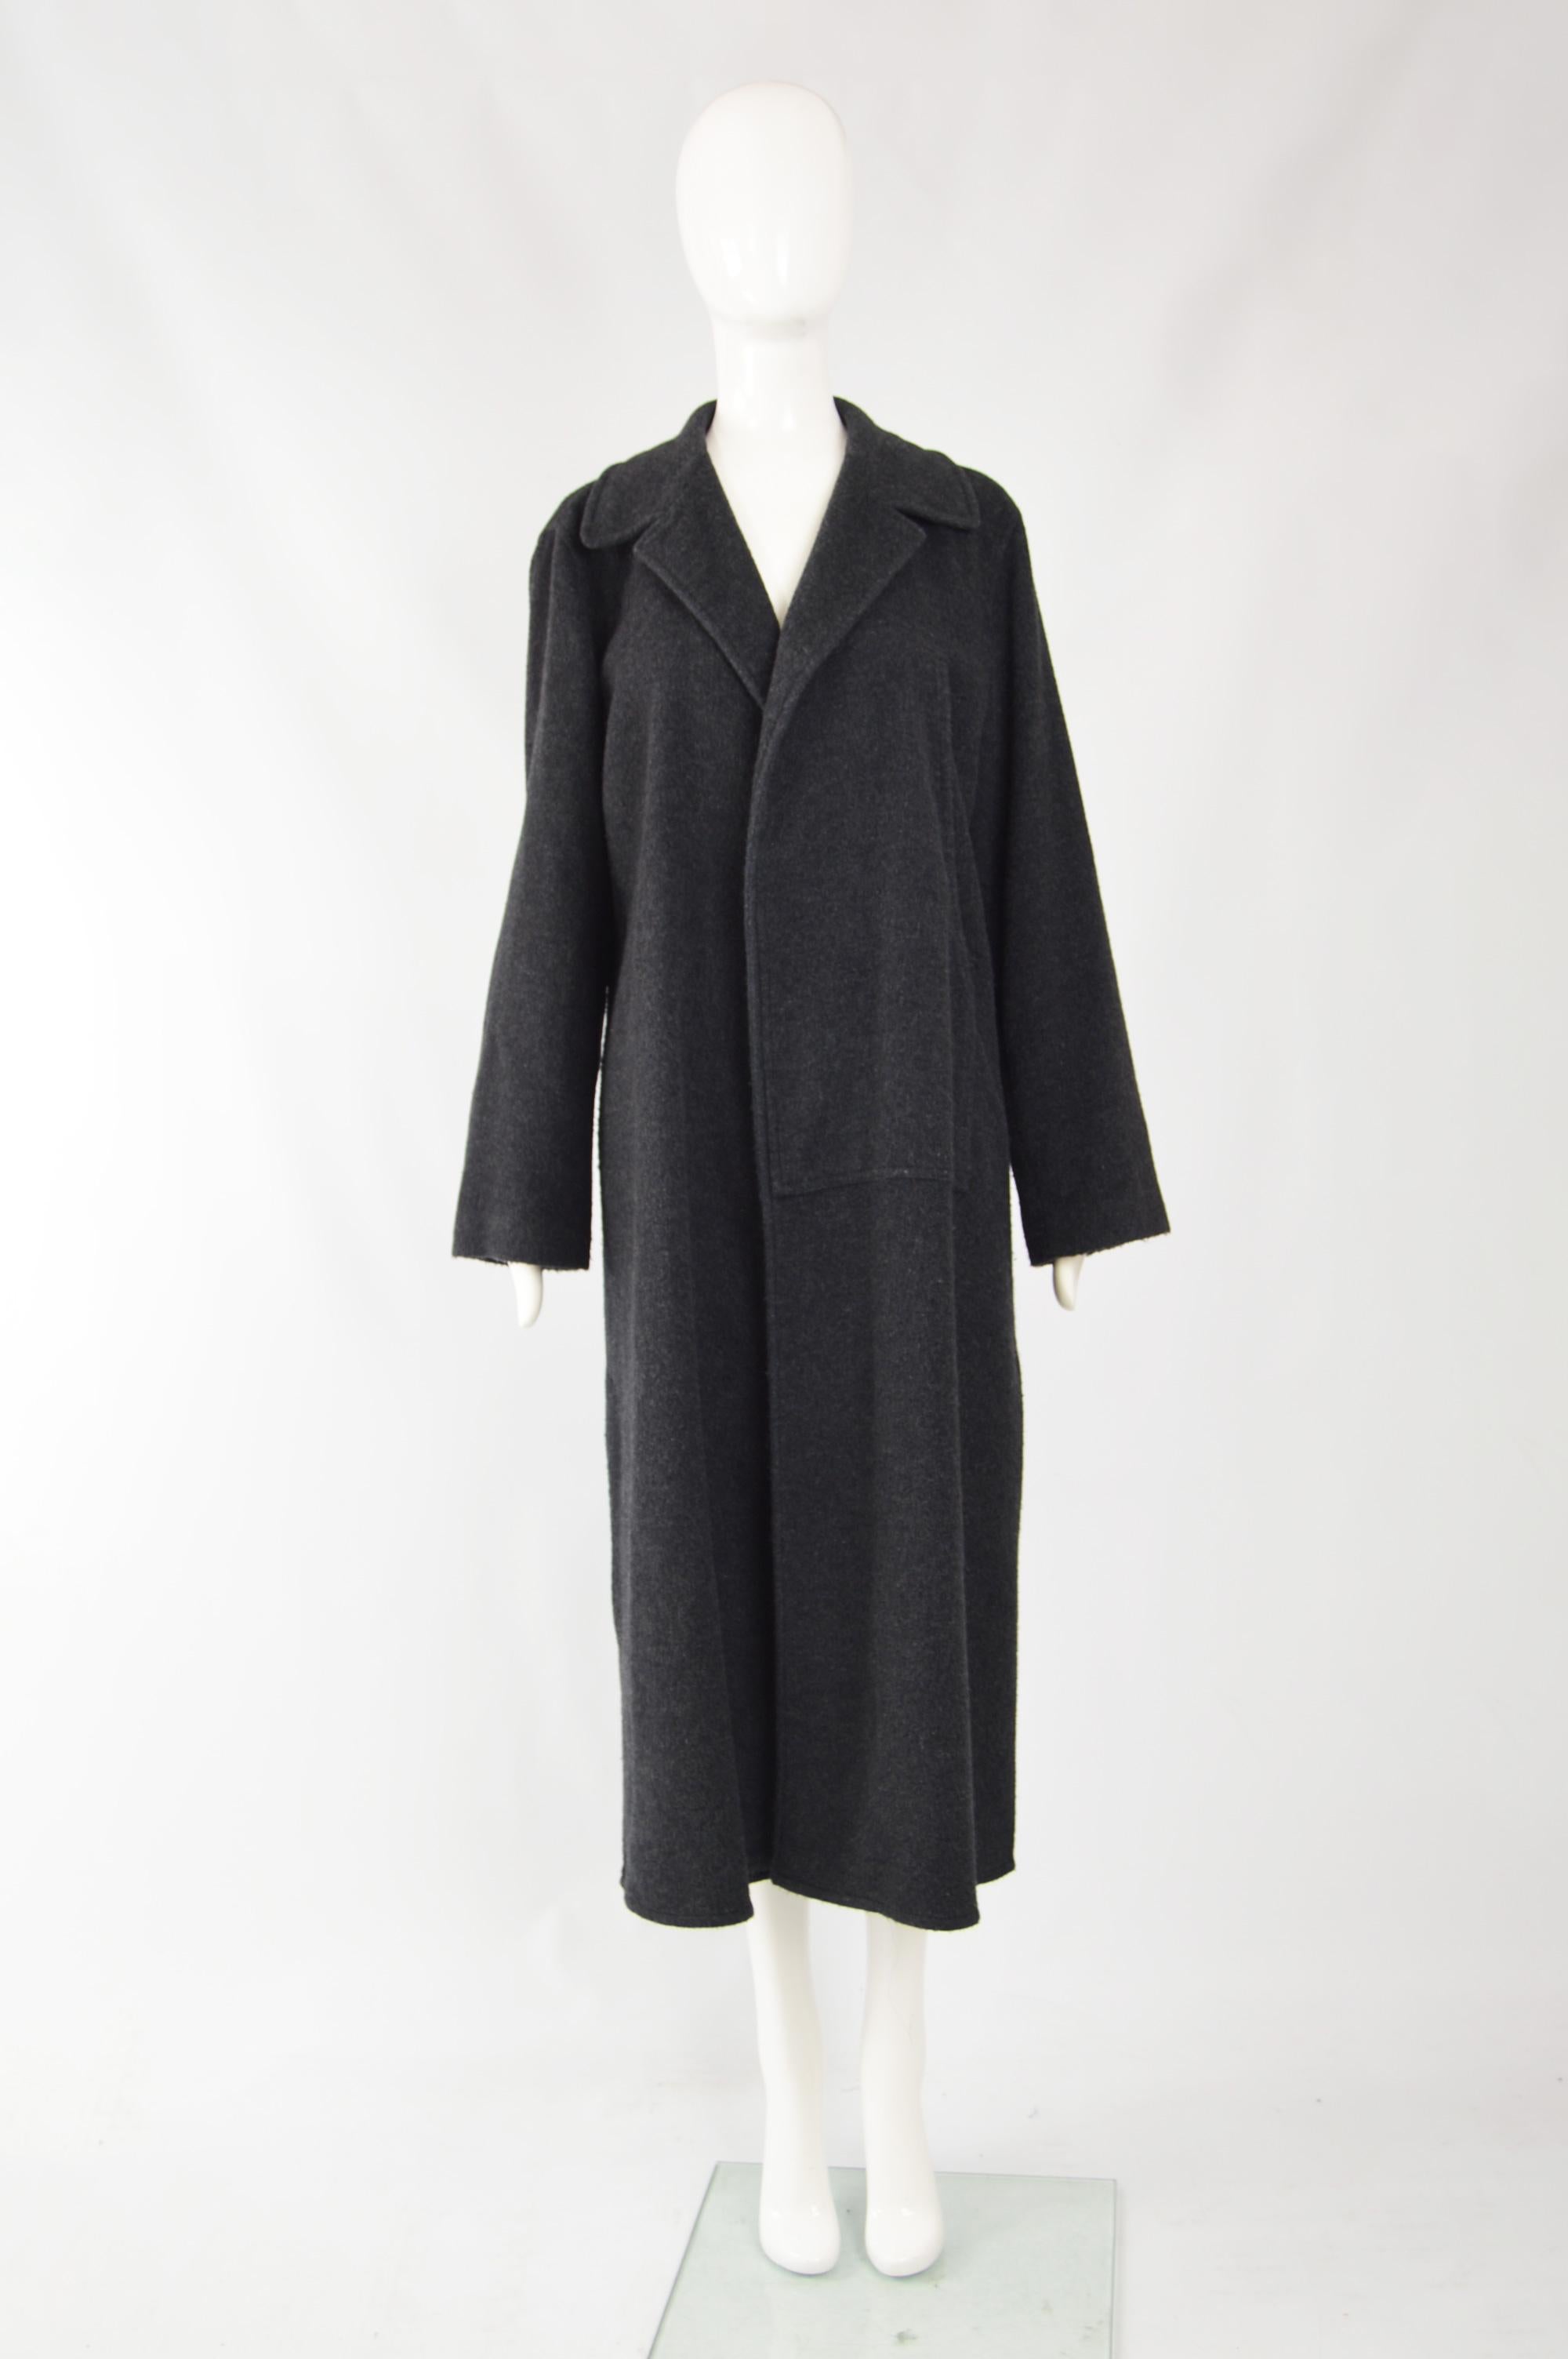 A chic vintage womens long overcoat from the 90s by Emporio Armani. In a charcoal grey wool blend (and blue interior) with no closures which makes the coat drape beautifully open when you walk, but it also looks great cinched in with a belt. (Please